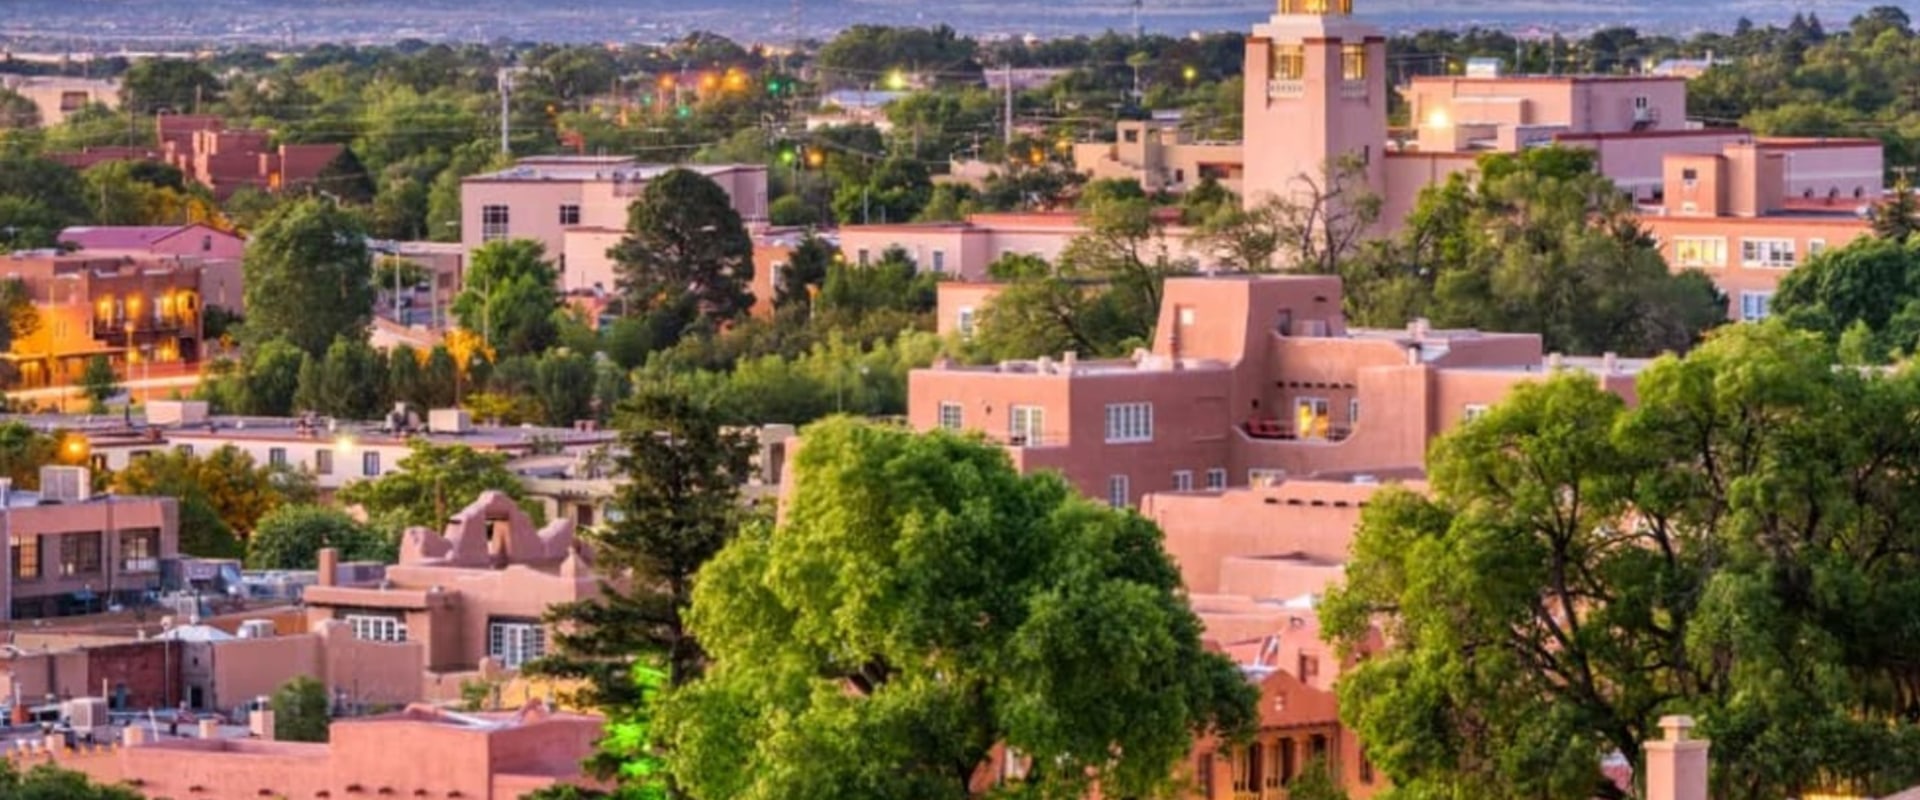 The Cost of Living in Santa Fe: An Overview